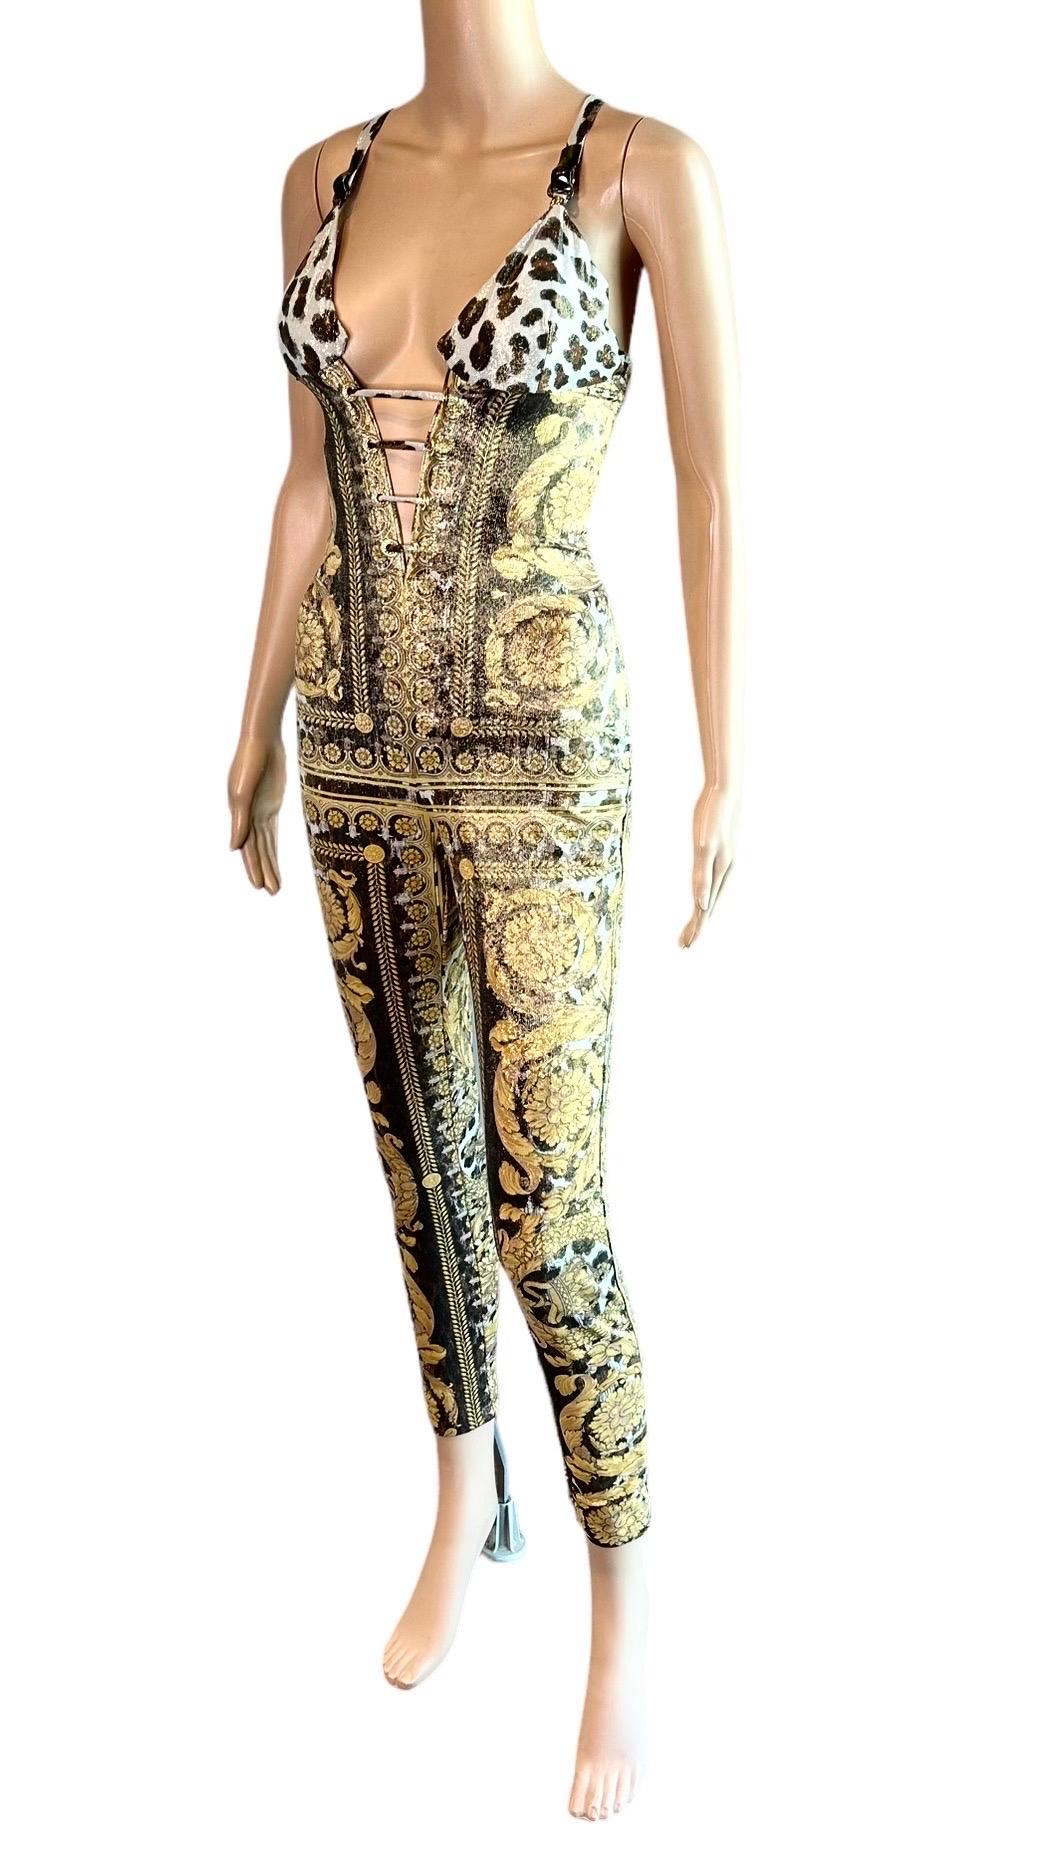 Gianni Versace S/S 1992 Runway Bustier Embellished Baroque Catsuit Jumpsuit For Sale 3